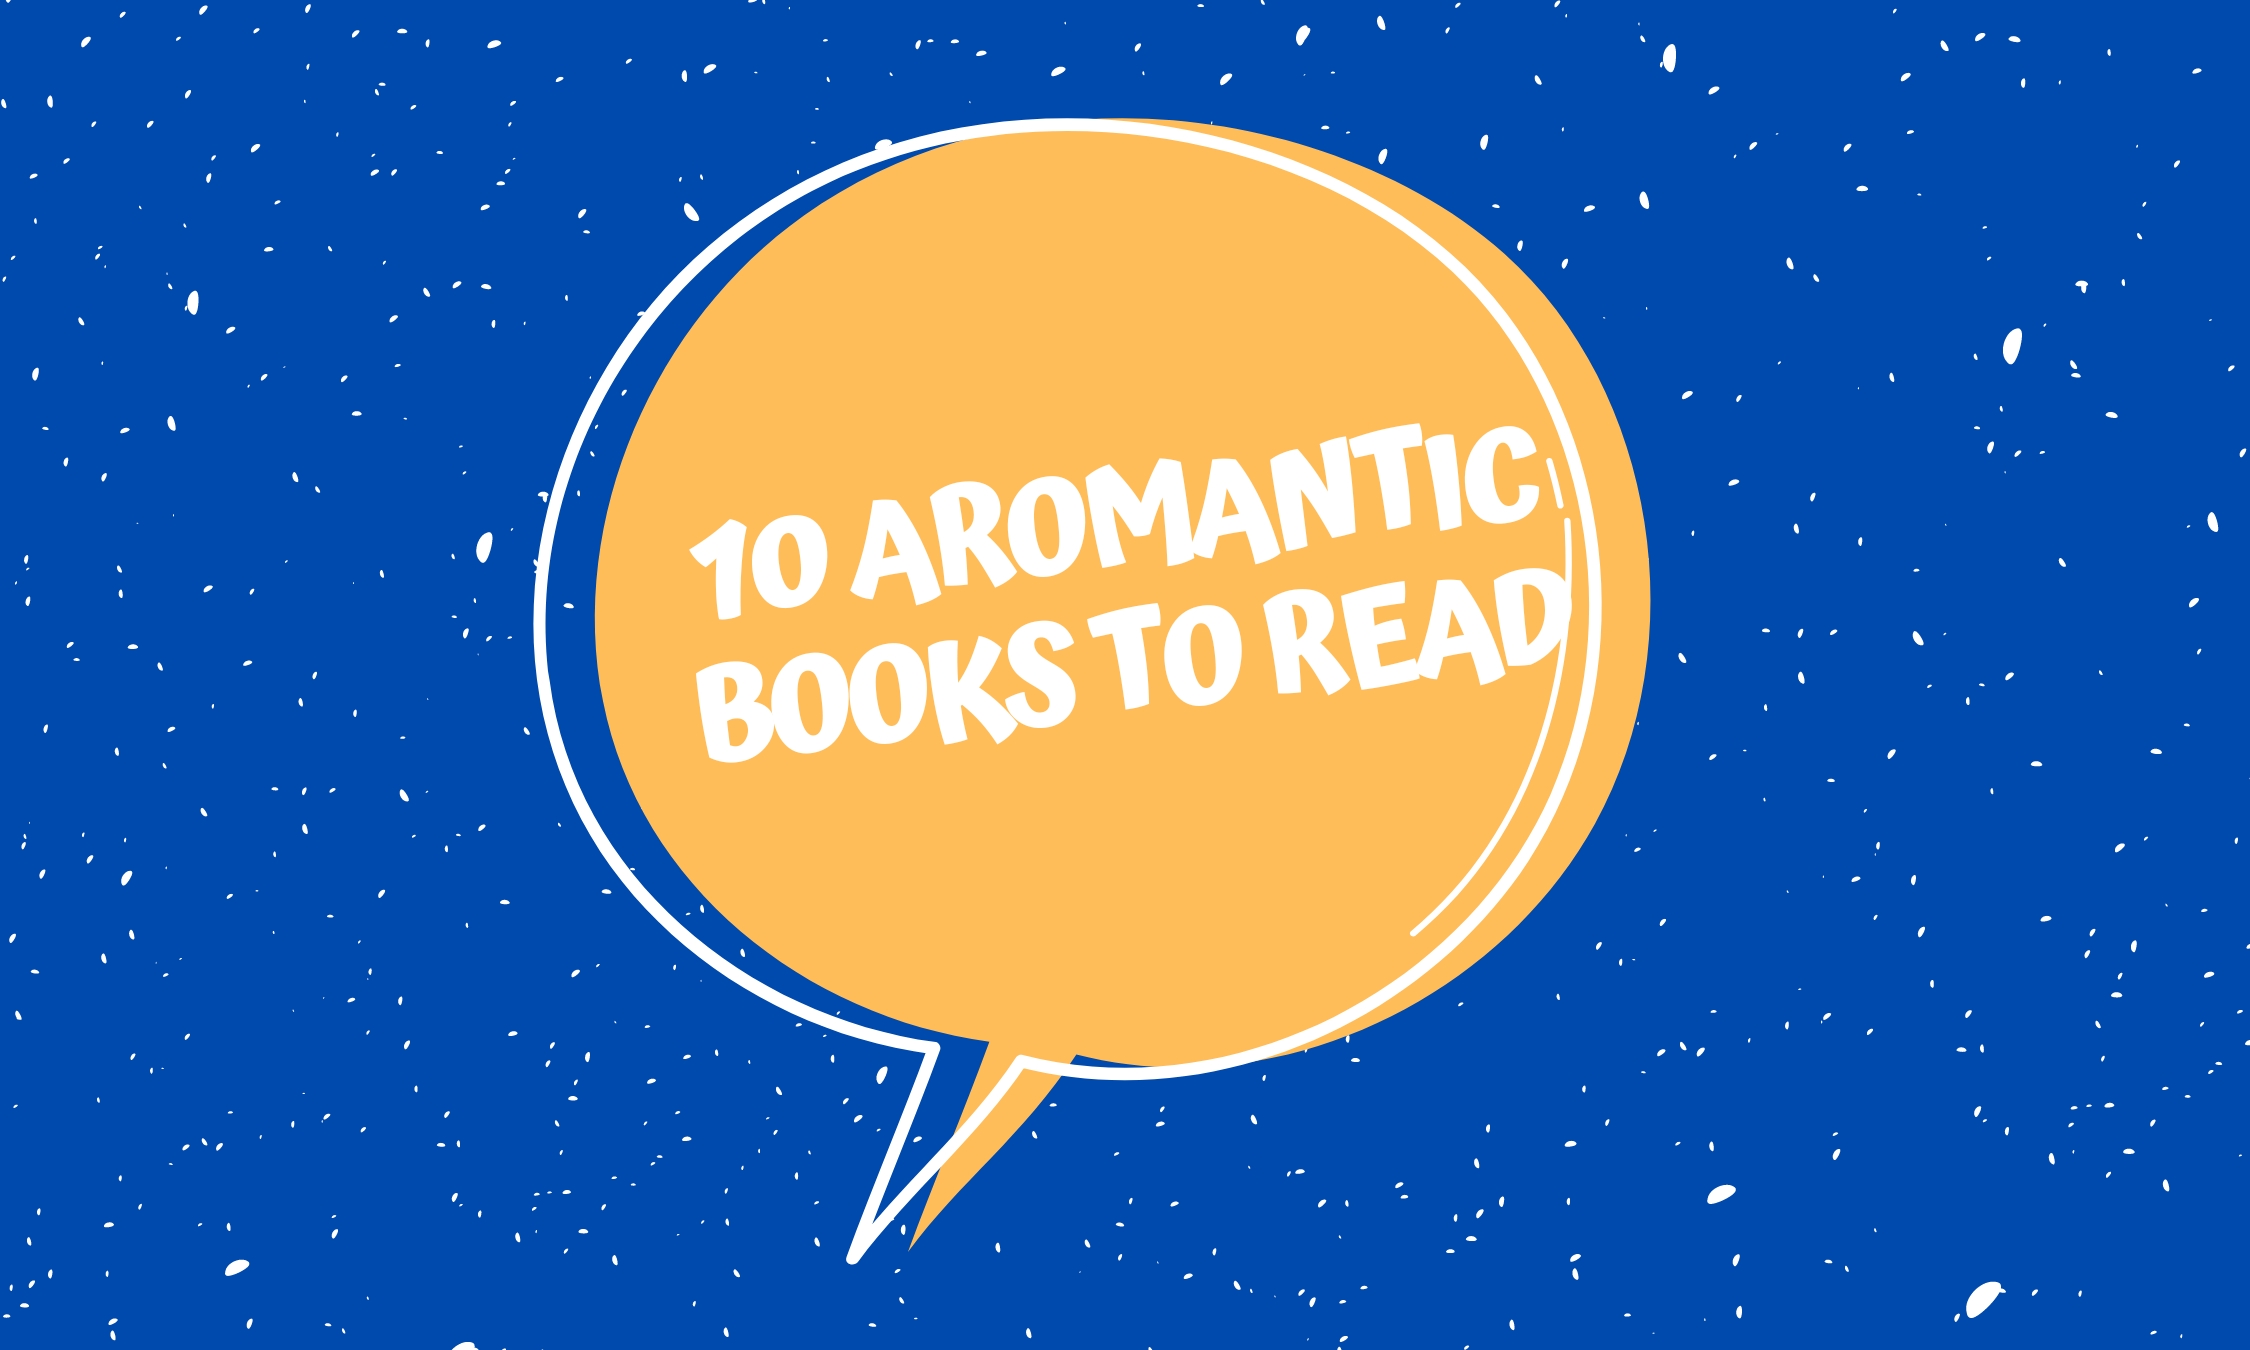 Here are 10 books that feature aromantic characters or stories